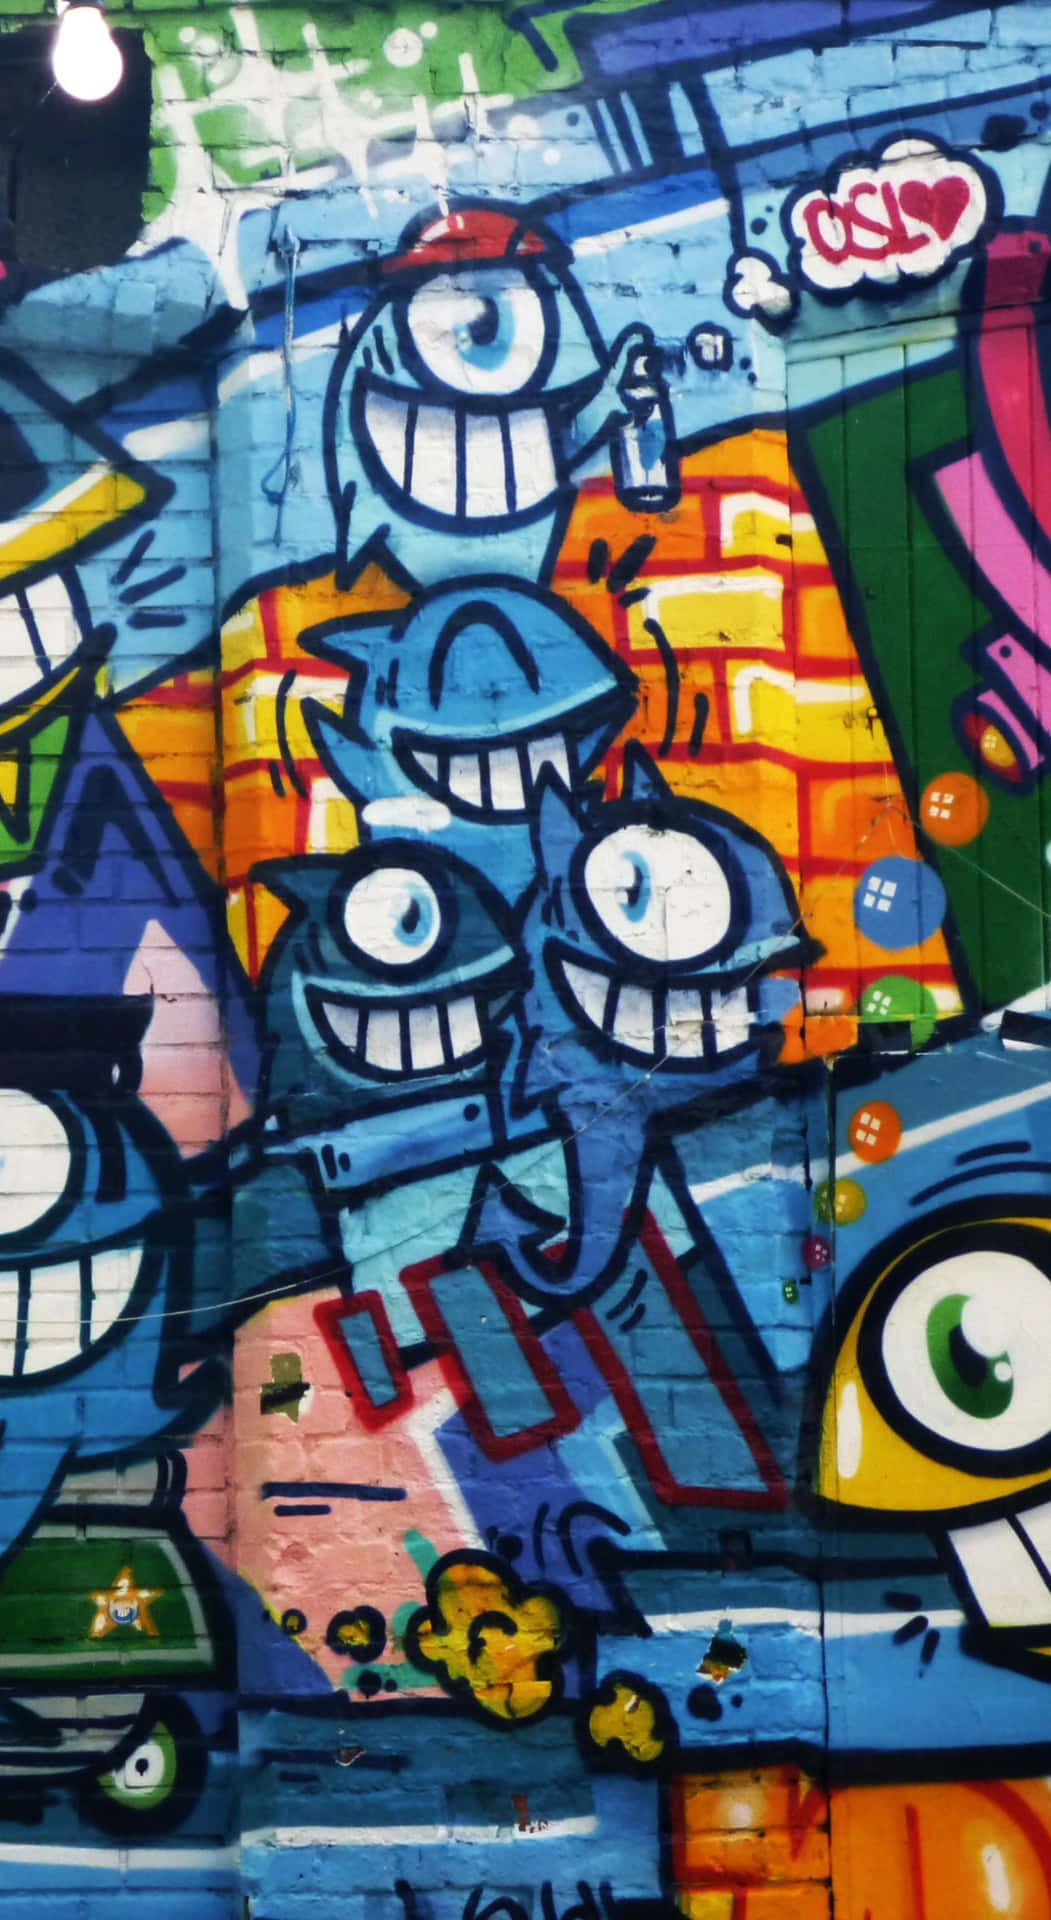 Graffiti Wall Art With One-eyed Creatures Background